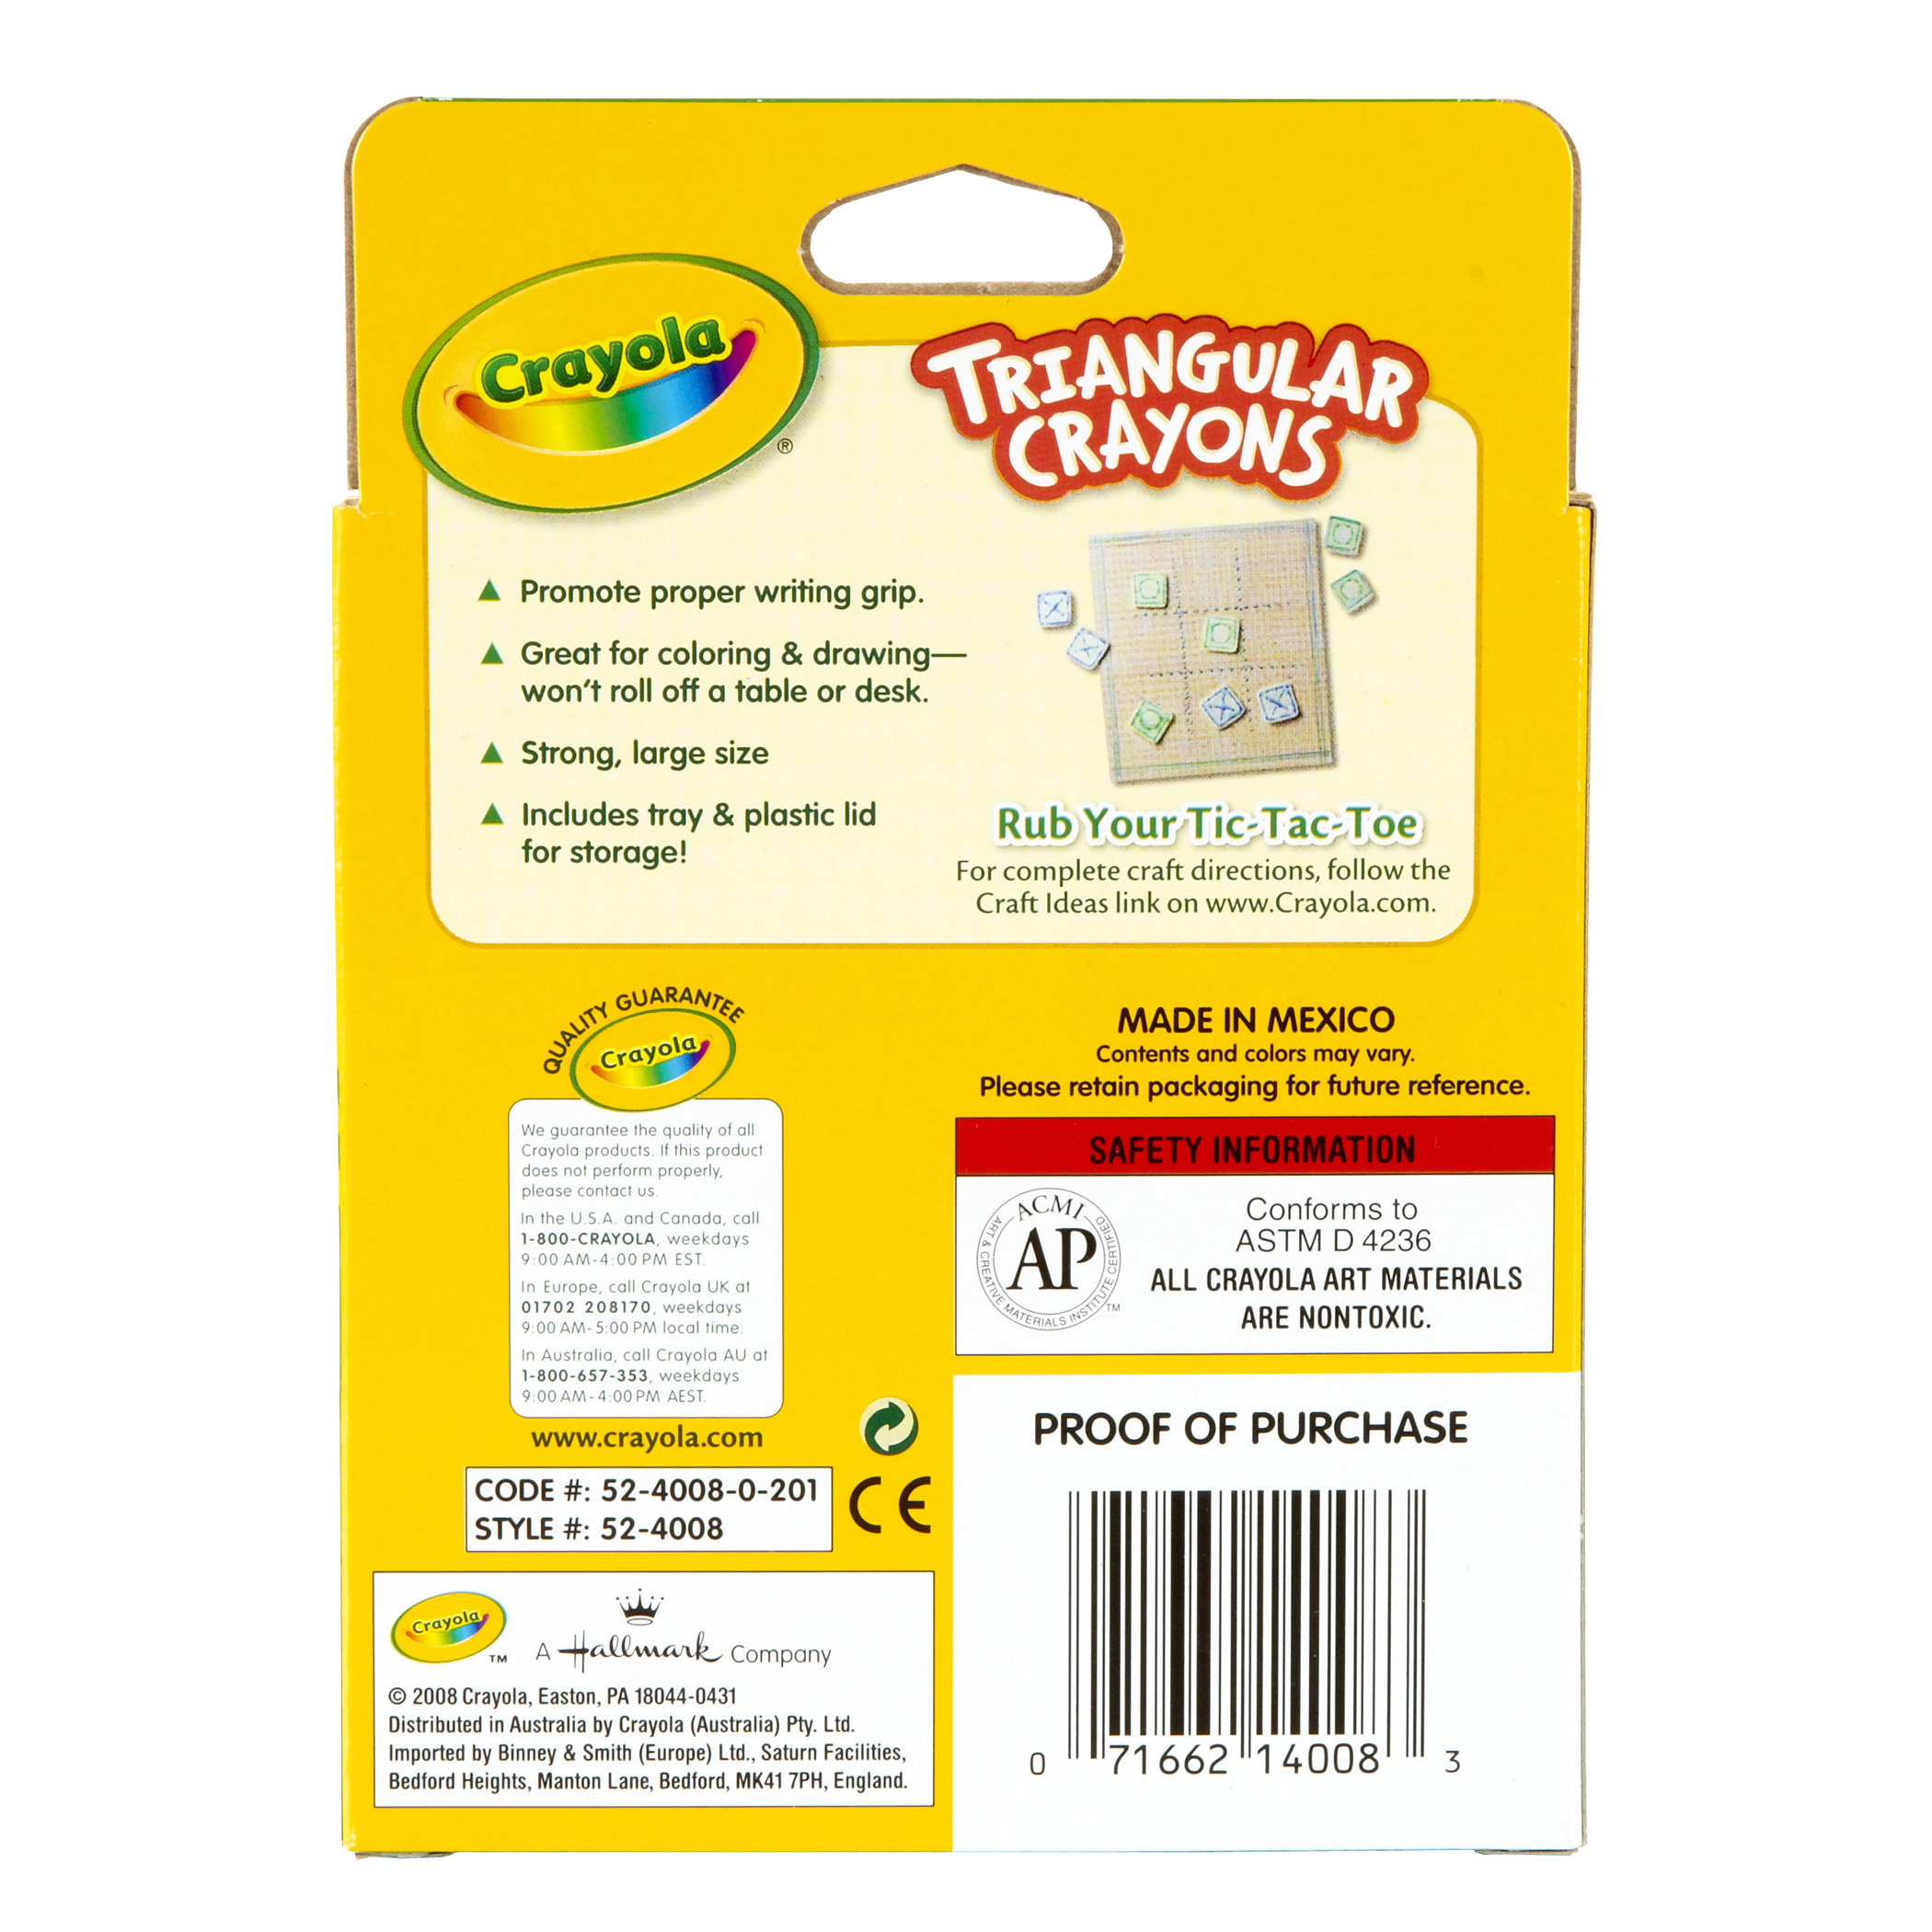 The Teachers' Lounge®  Dry Erase Washable Crayons, Bright Colors